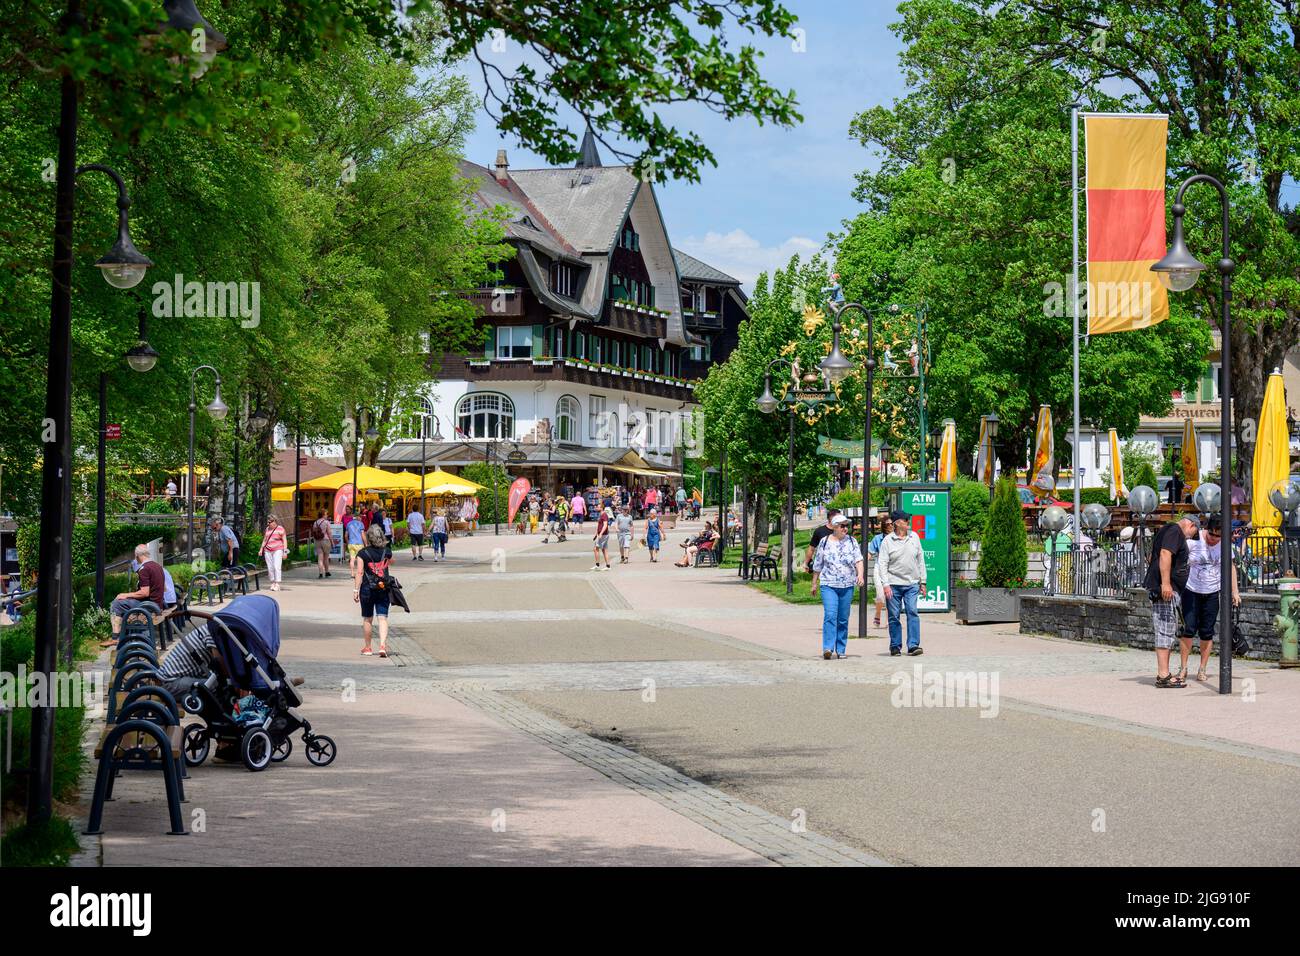 Germany, Baden-Württemberg, Black Forest, Titisee, the pedestrian zone. Stock Photo